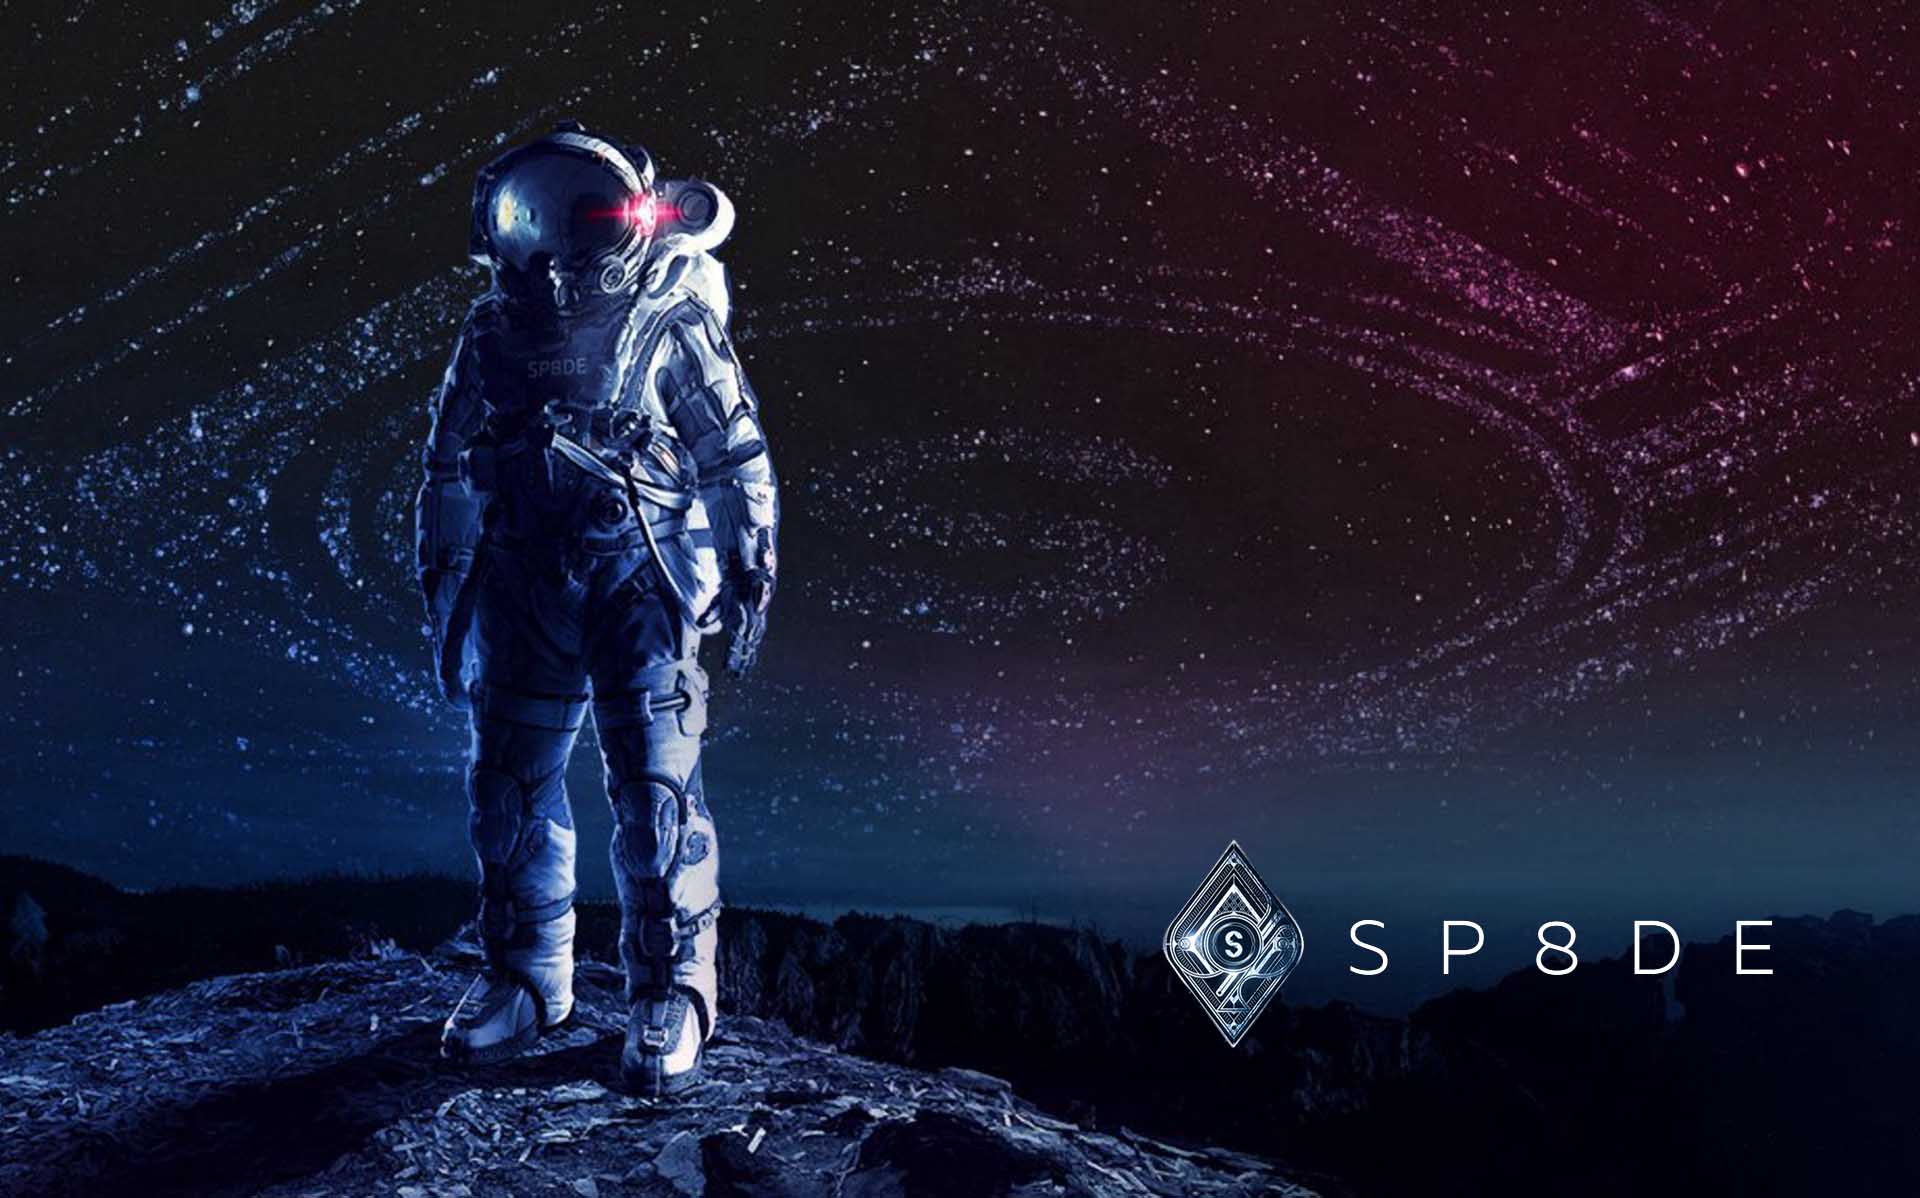 Sp8de Hits the Jackpot with Two New Advisors